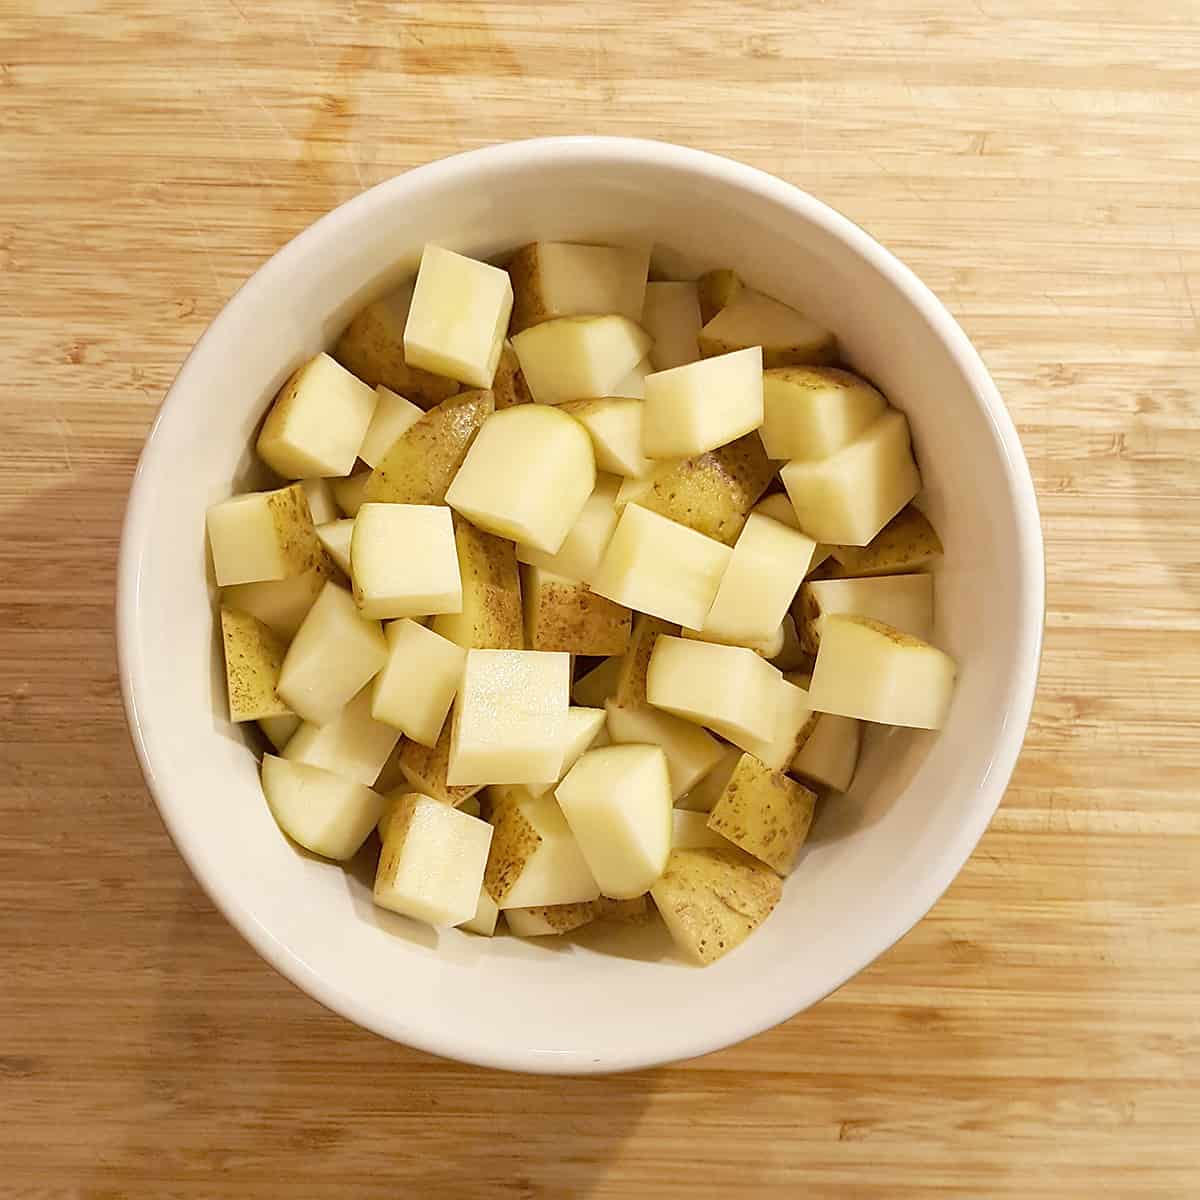 Cubed potatoes in a bowl.